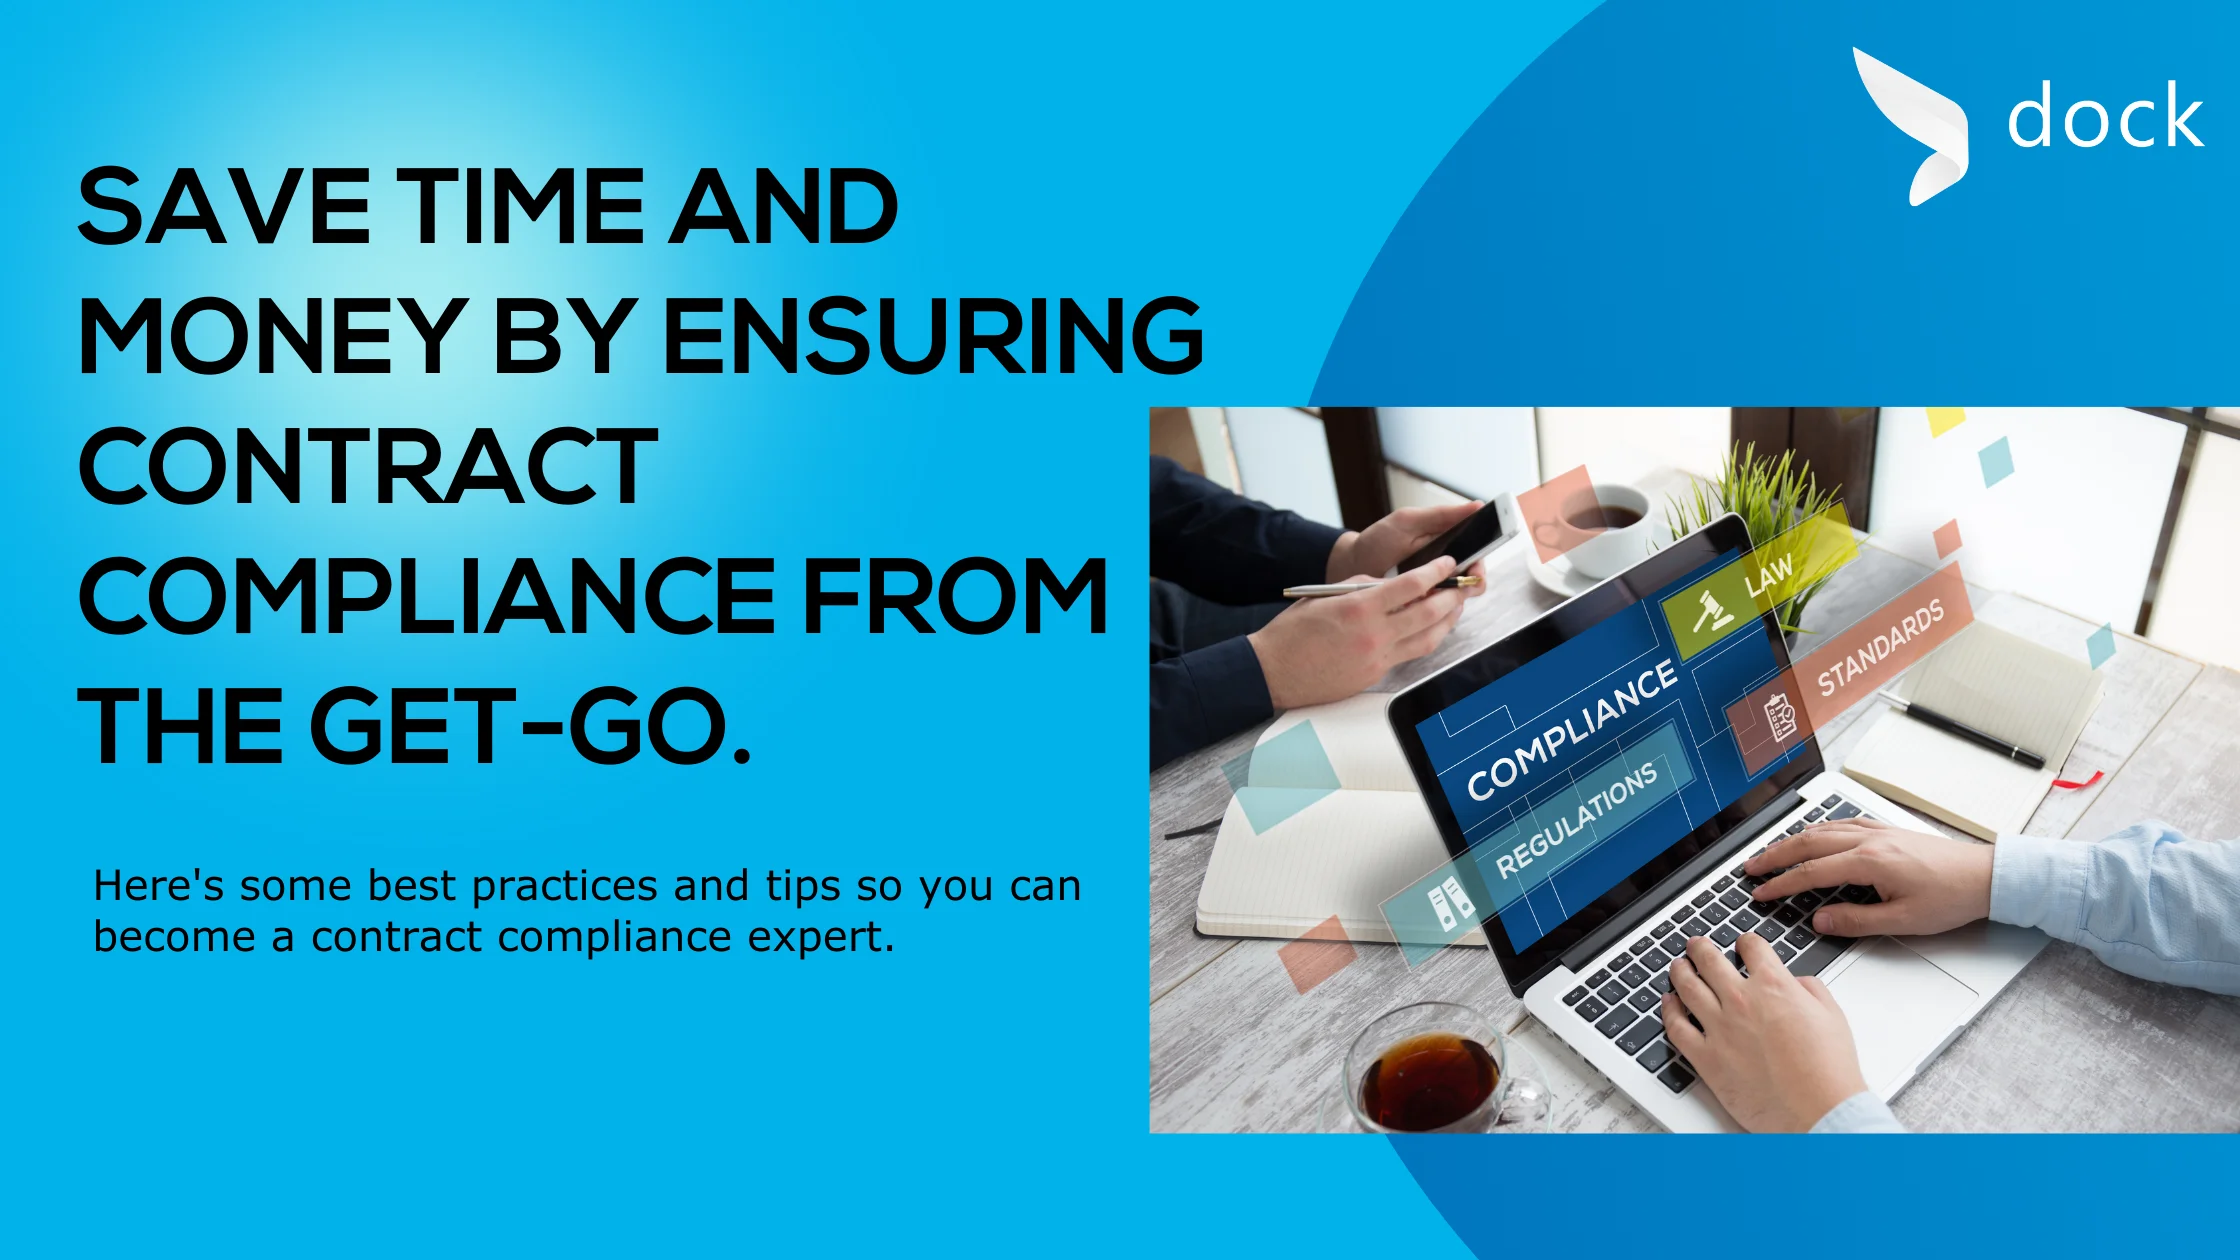 Save time and money by ensuring contract compliance from the get-go.